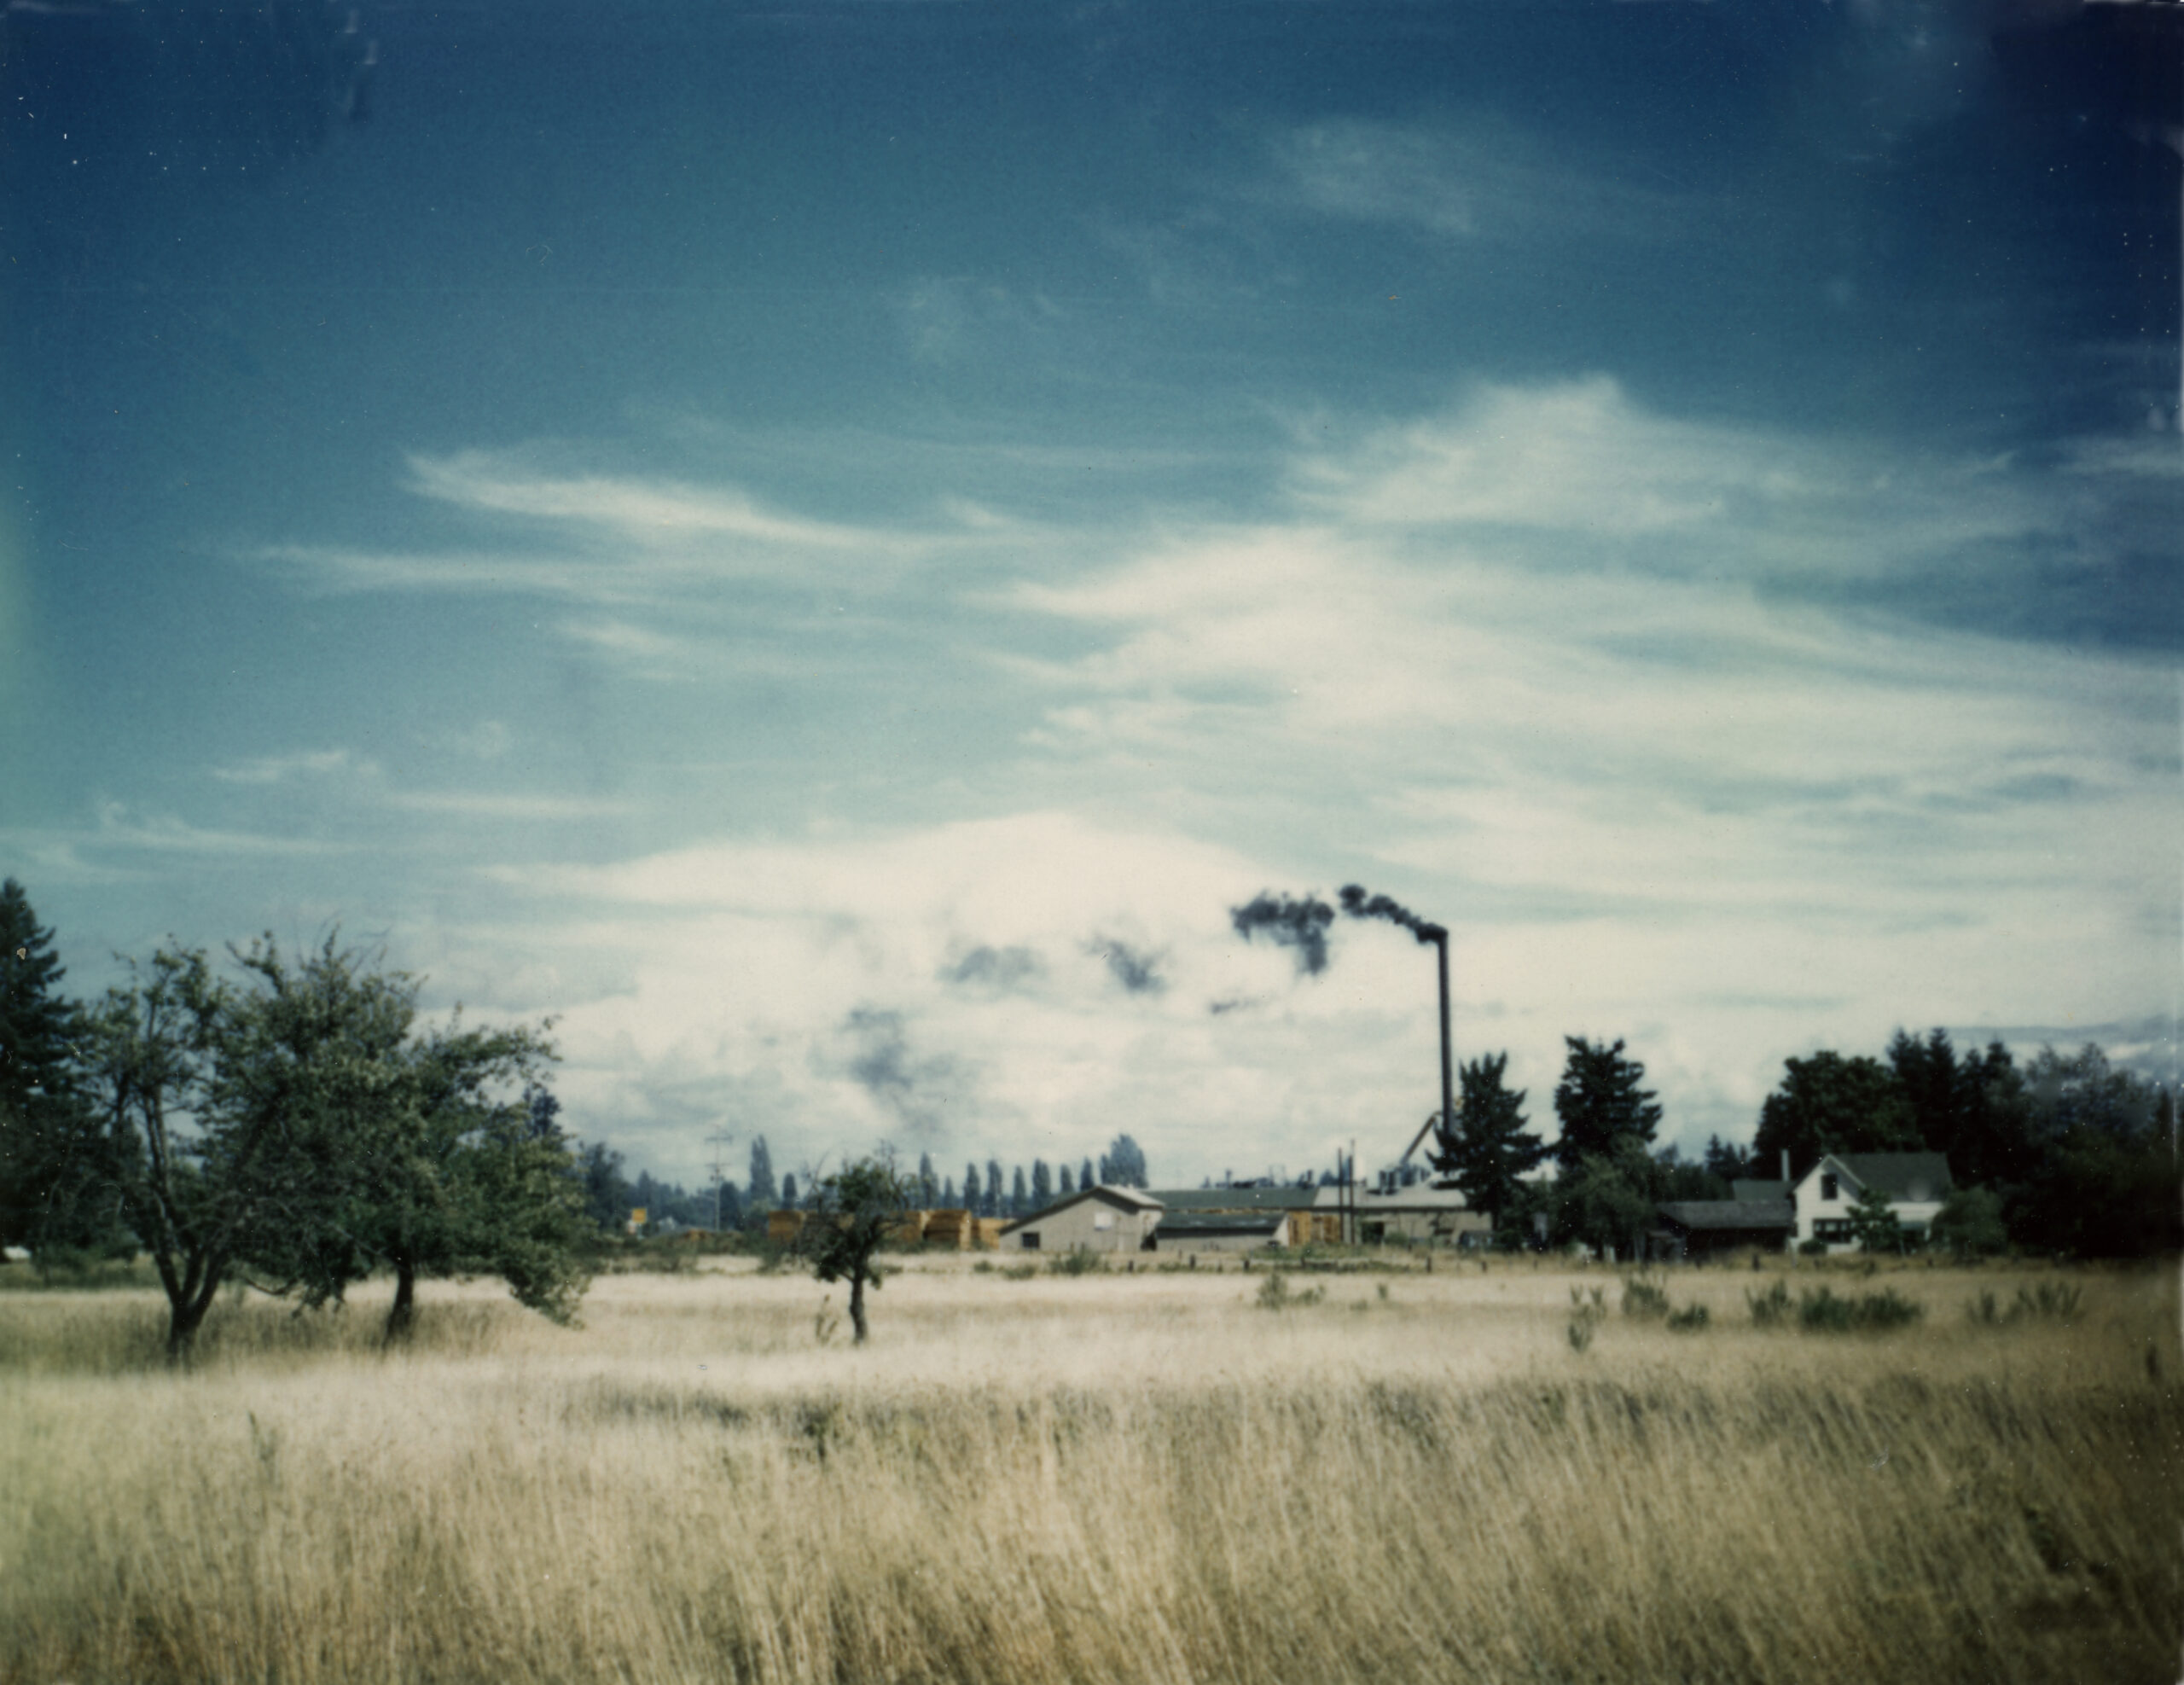 Grassy meadow in front of an old lumber mill, with a tall smokestack spewing black smoke.